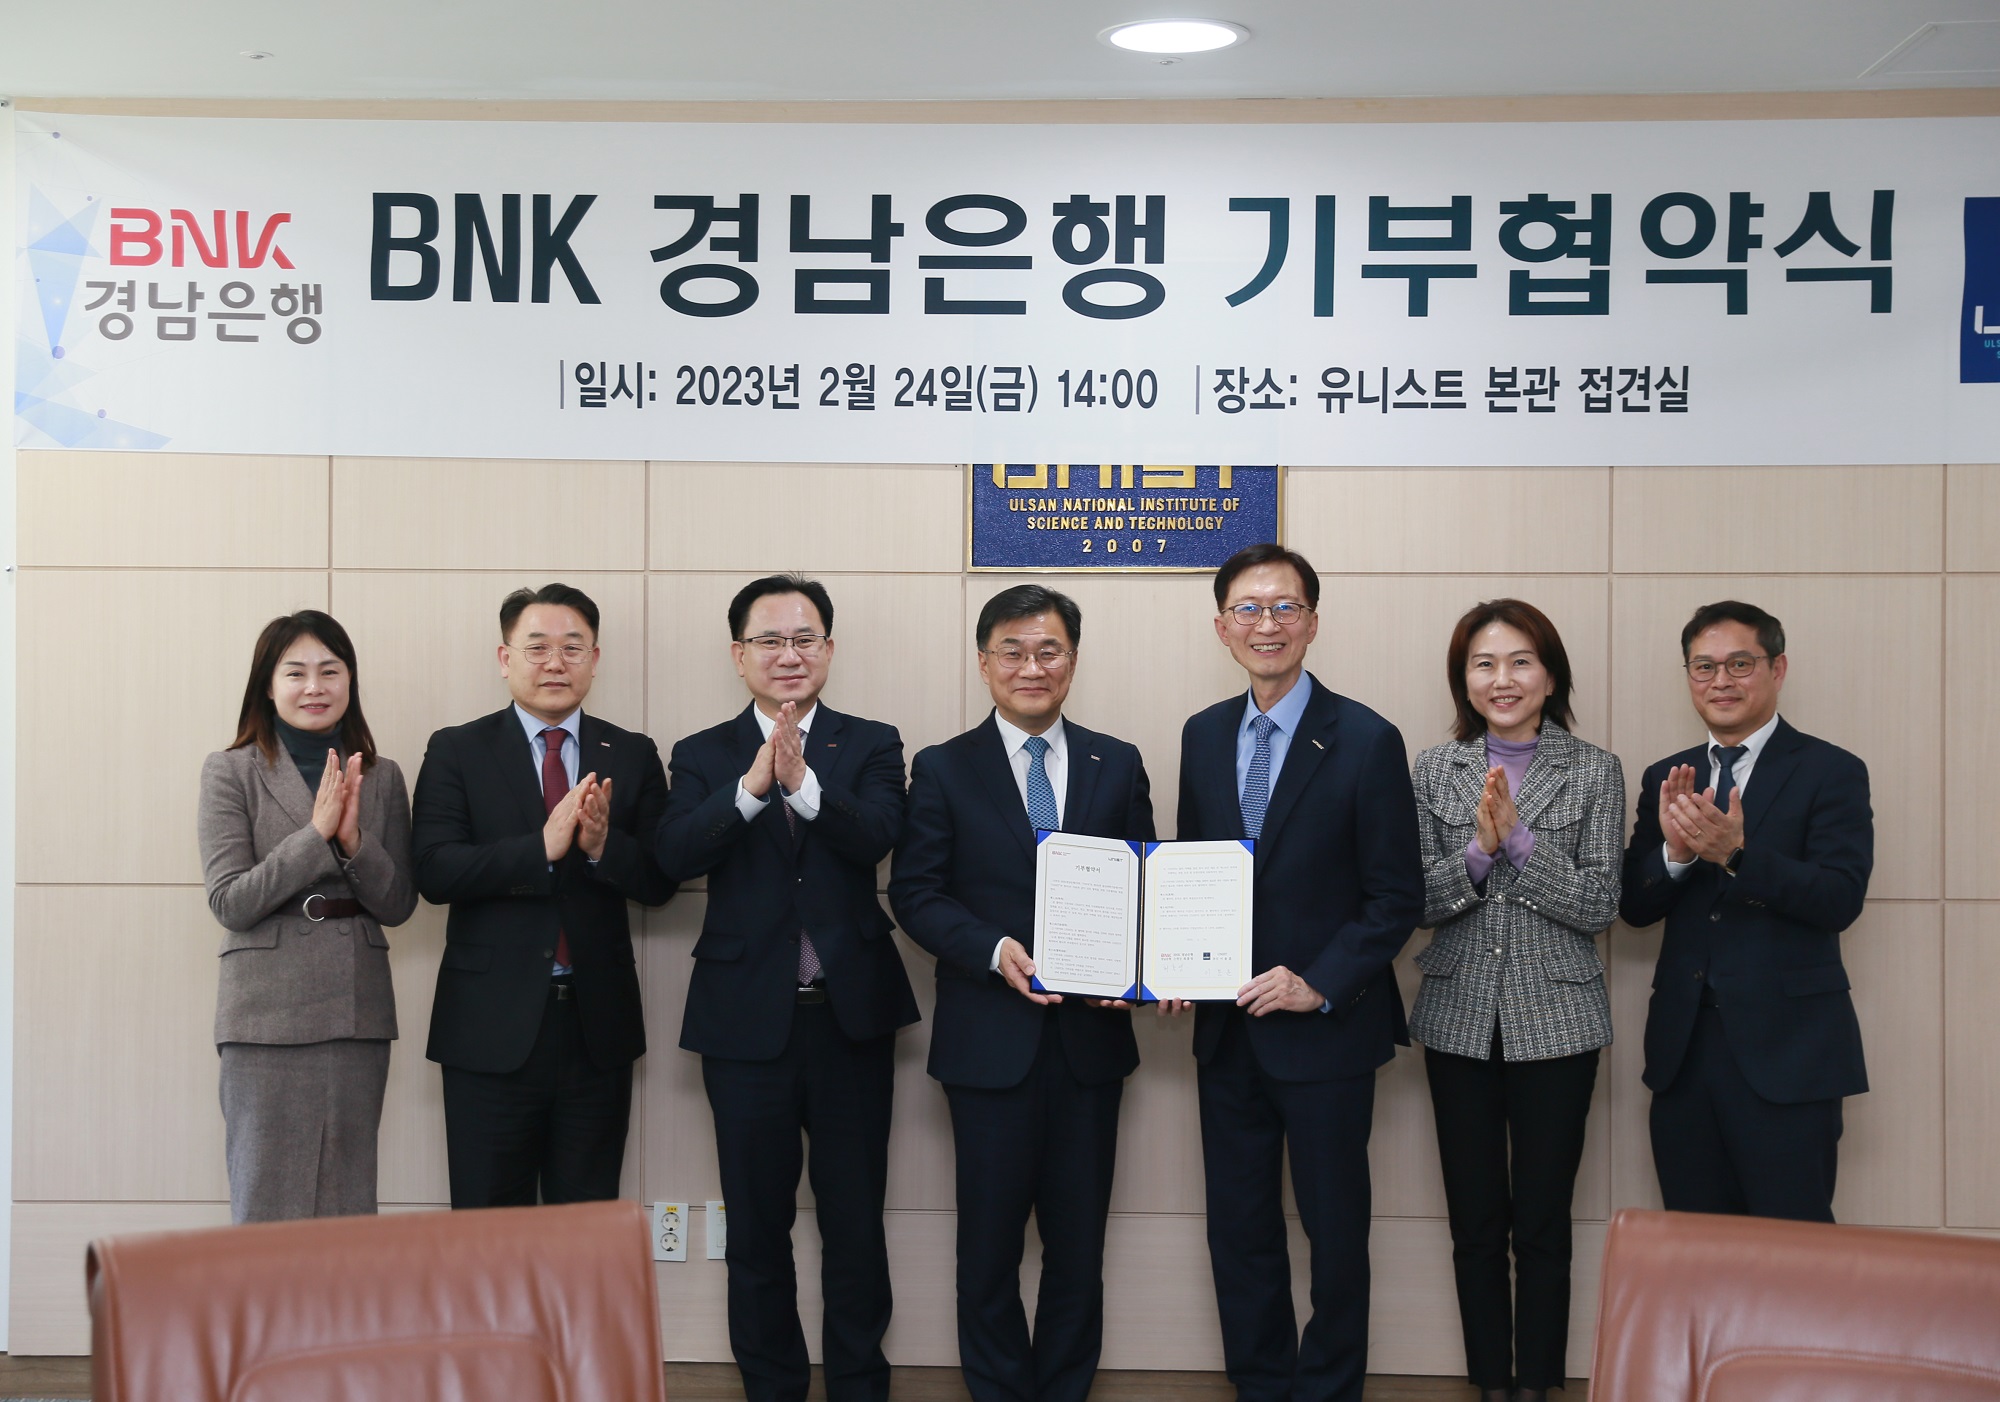 The donation ceremony took place in the Main Administration Building of UNIST on February 24, 2023. Fourth from the left are President Hong-Young Choi of BNK Kyongnam Bank and UNIST President Yong Hoon Lee. 